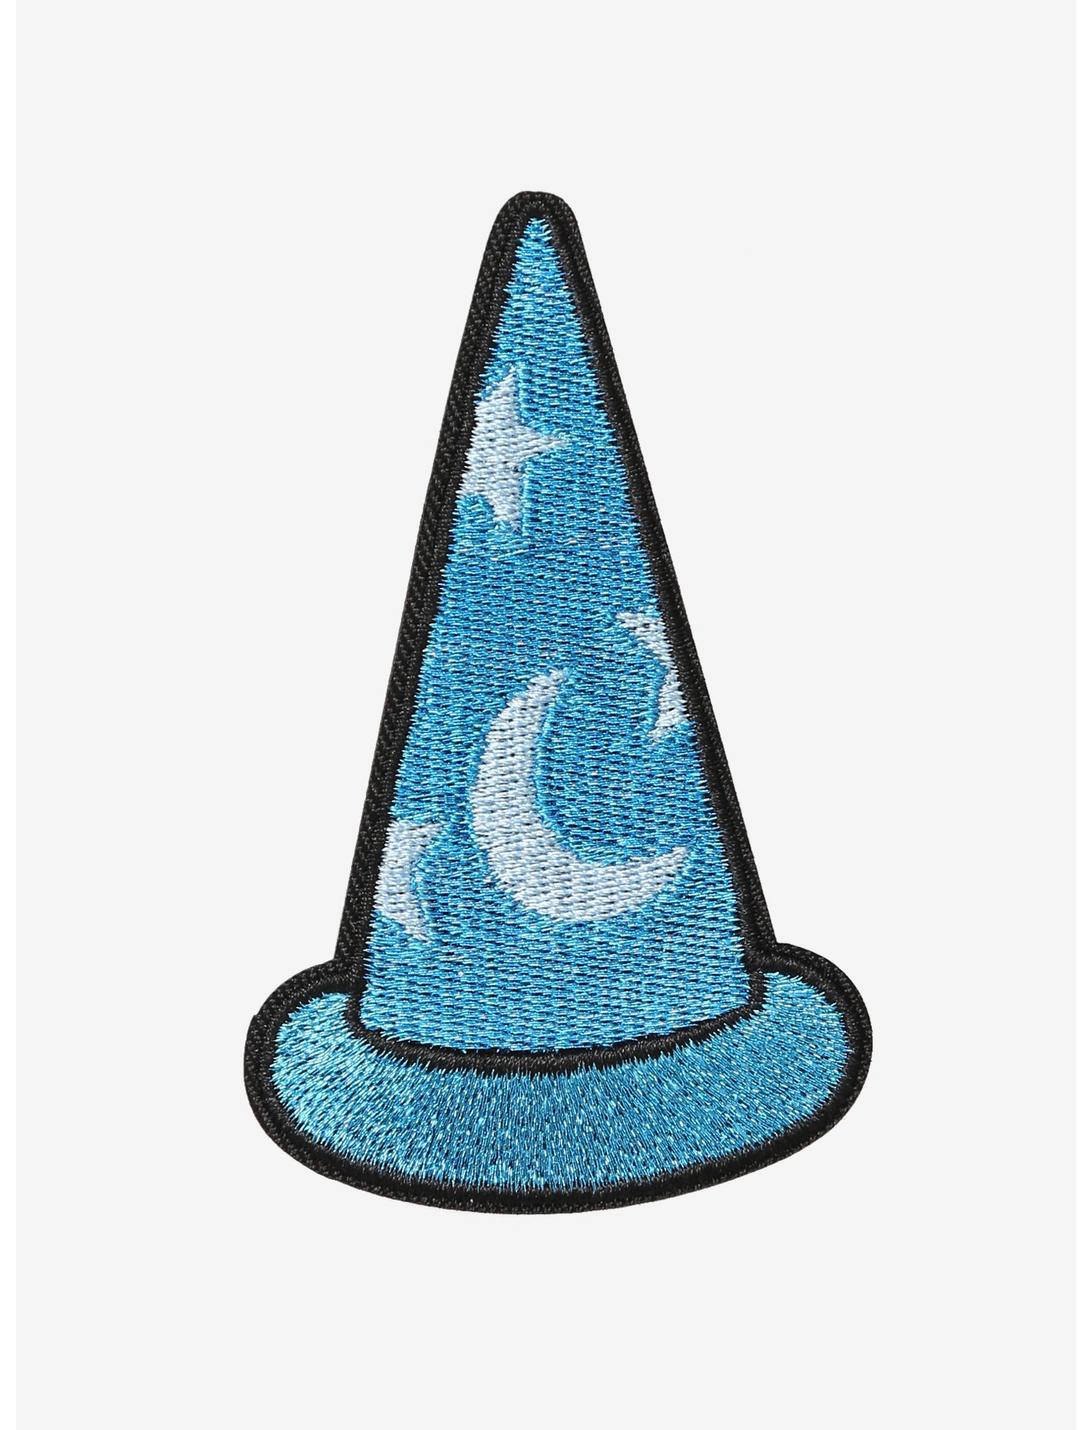 Disney Fantasia Sorcerer Hat Iron-On Patch - BoxLunch Exclusive, , hi-res